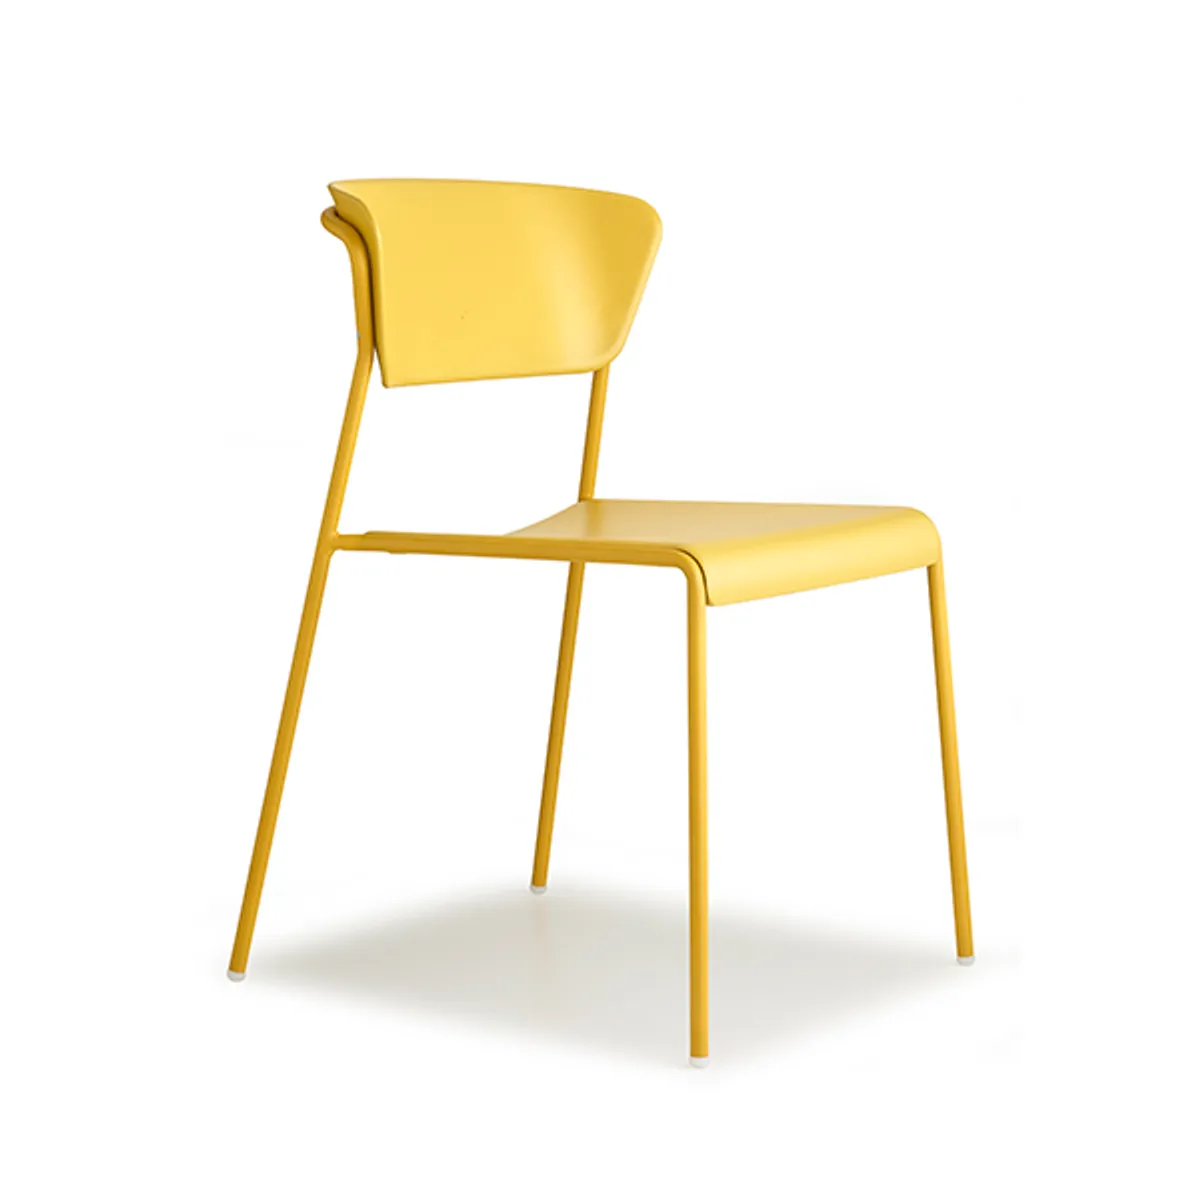 Robyn Soft Outdoor Chair Cafe Furniture Insideoutcontracts 020